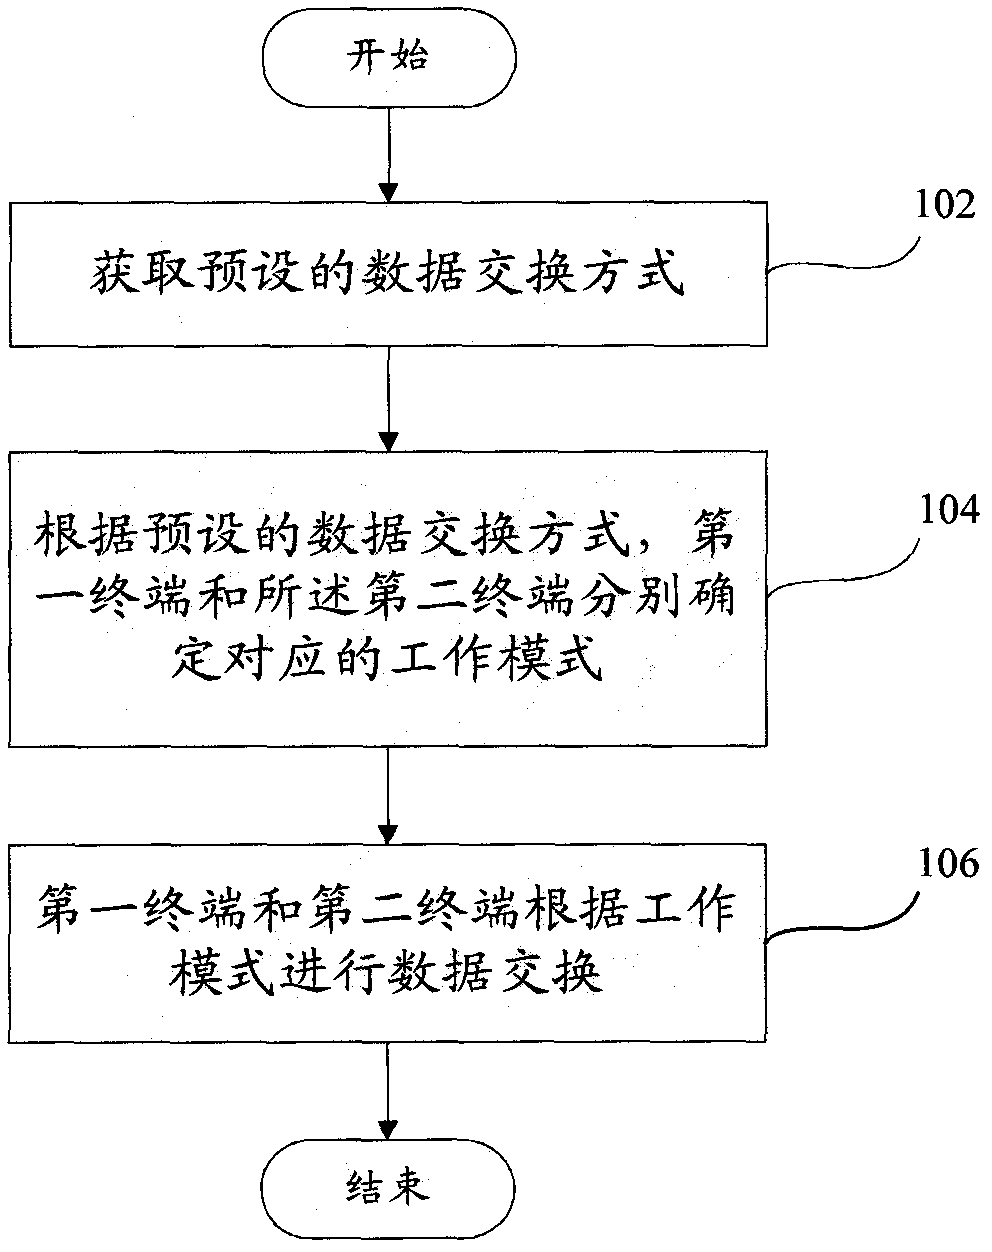 Data exchange method based on near field communication technology and mobile terminal